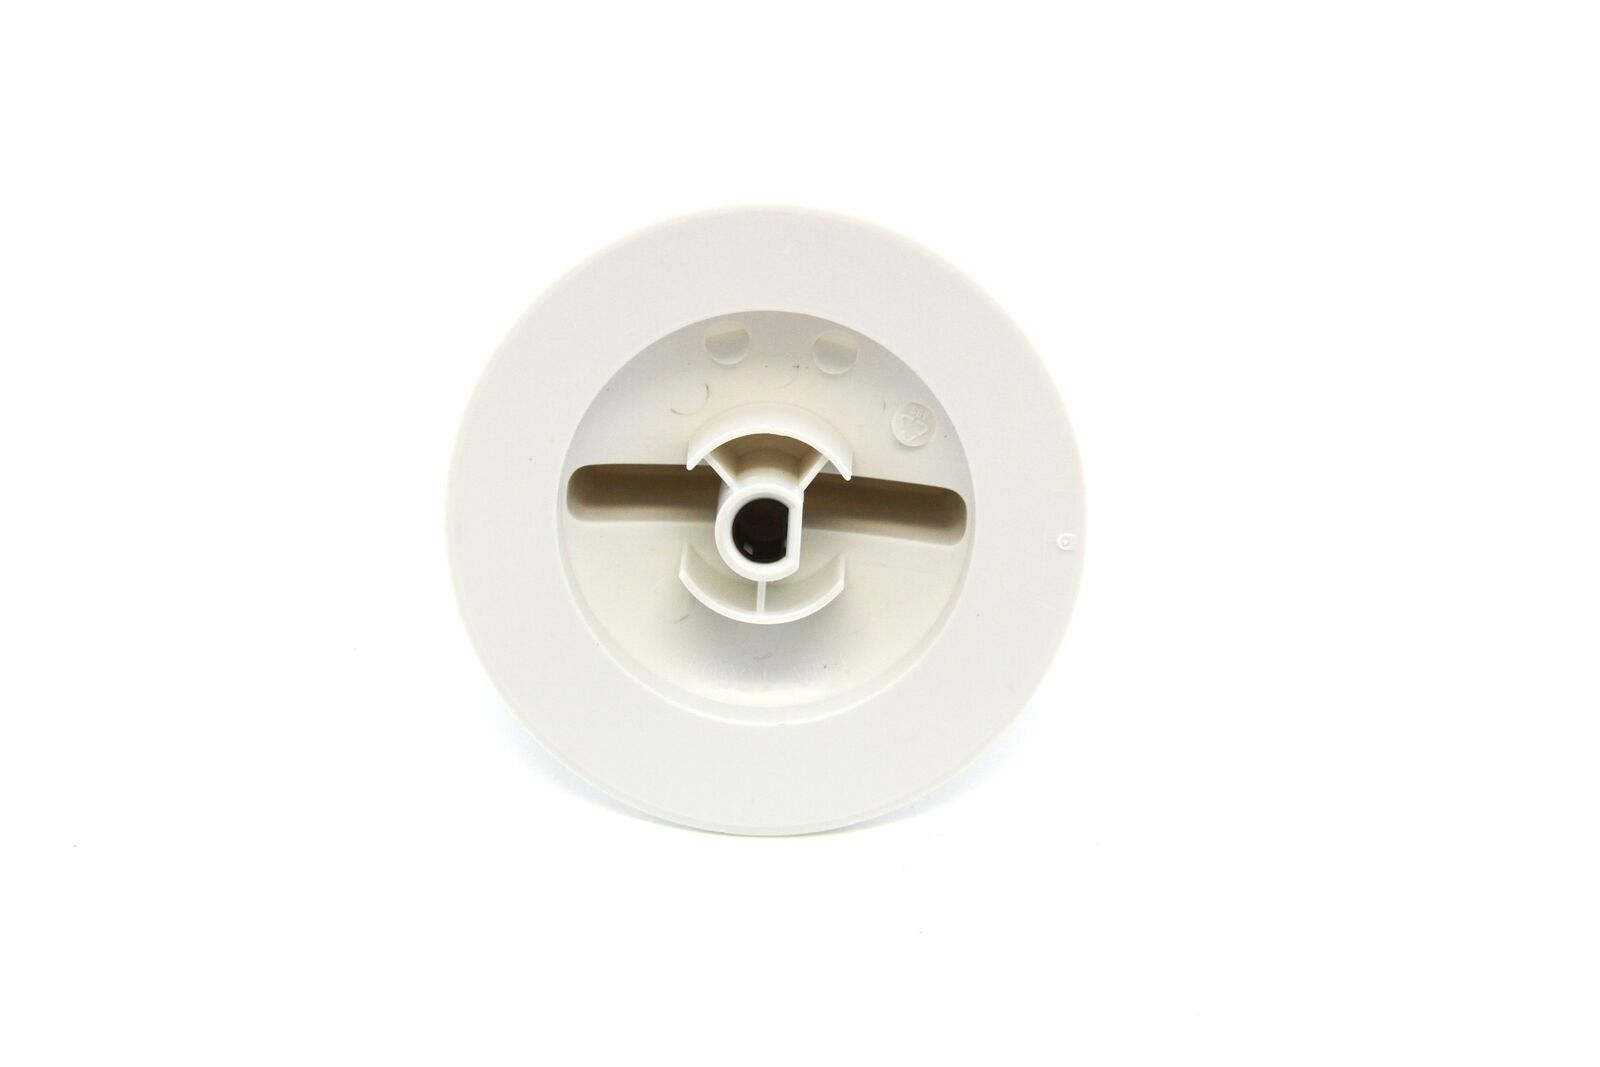 1 White Dryer Timer Control Knob Fits General Electric Hotpoint RCA WE1M652 Best In Auto replacement 212D1721 AP3995164 1264289 - фотография #3